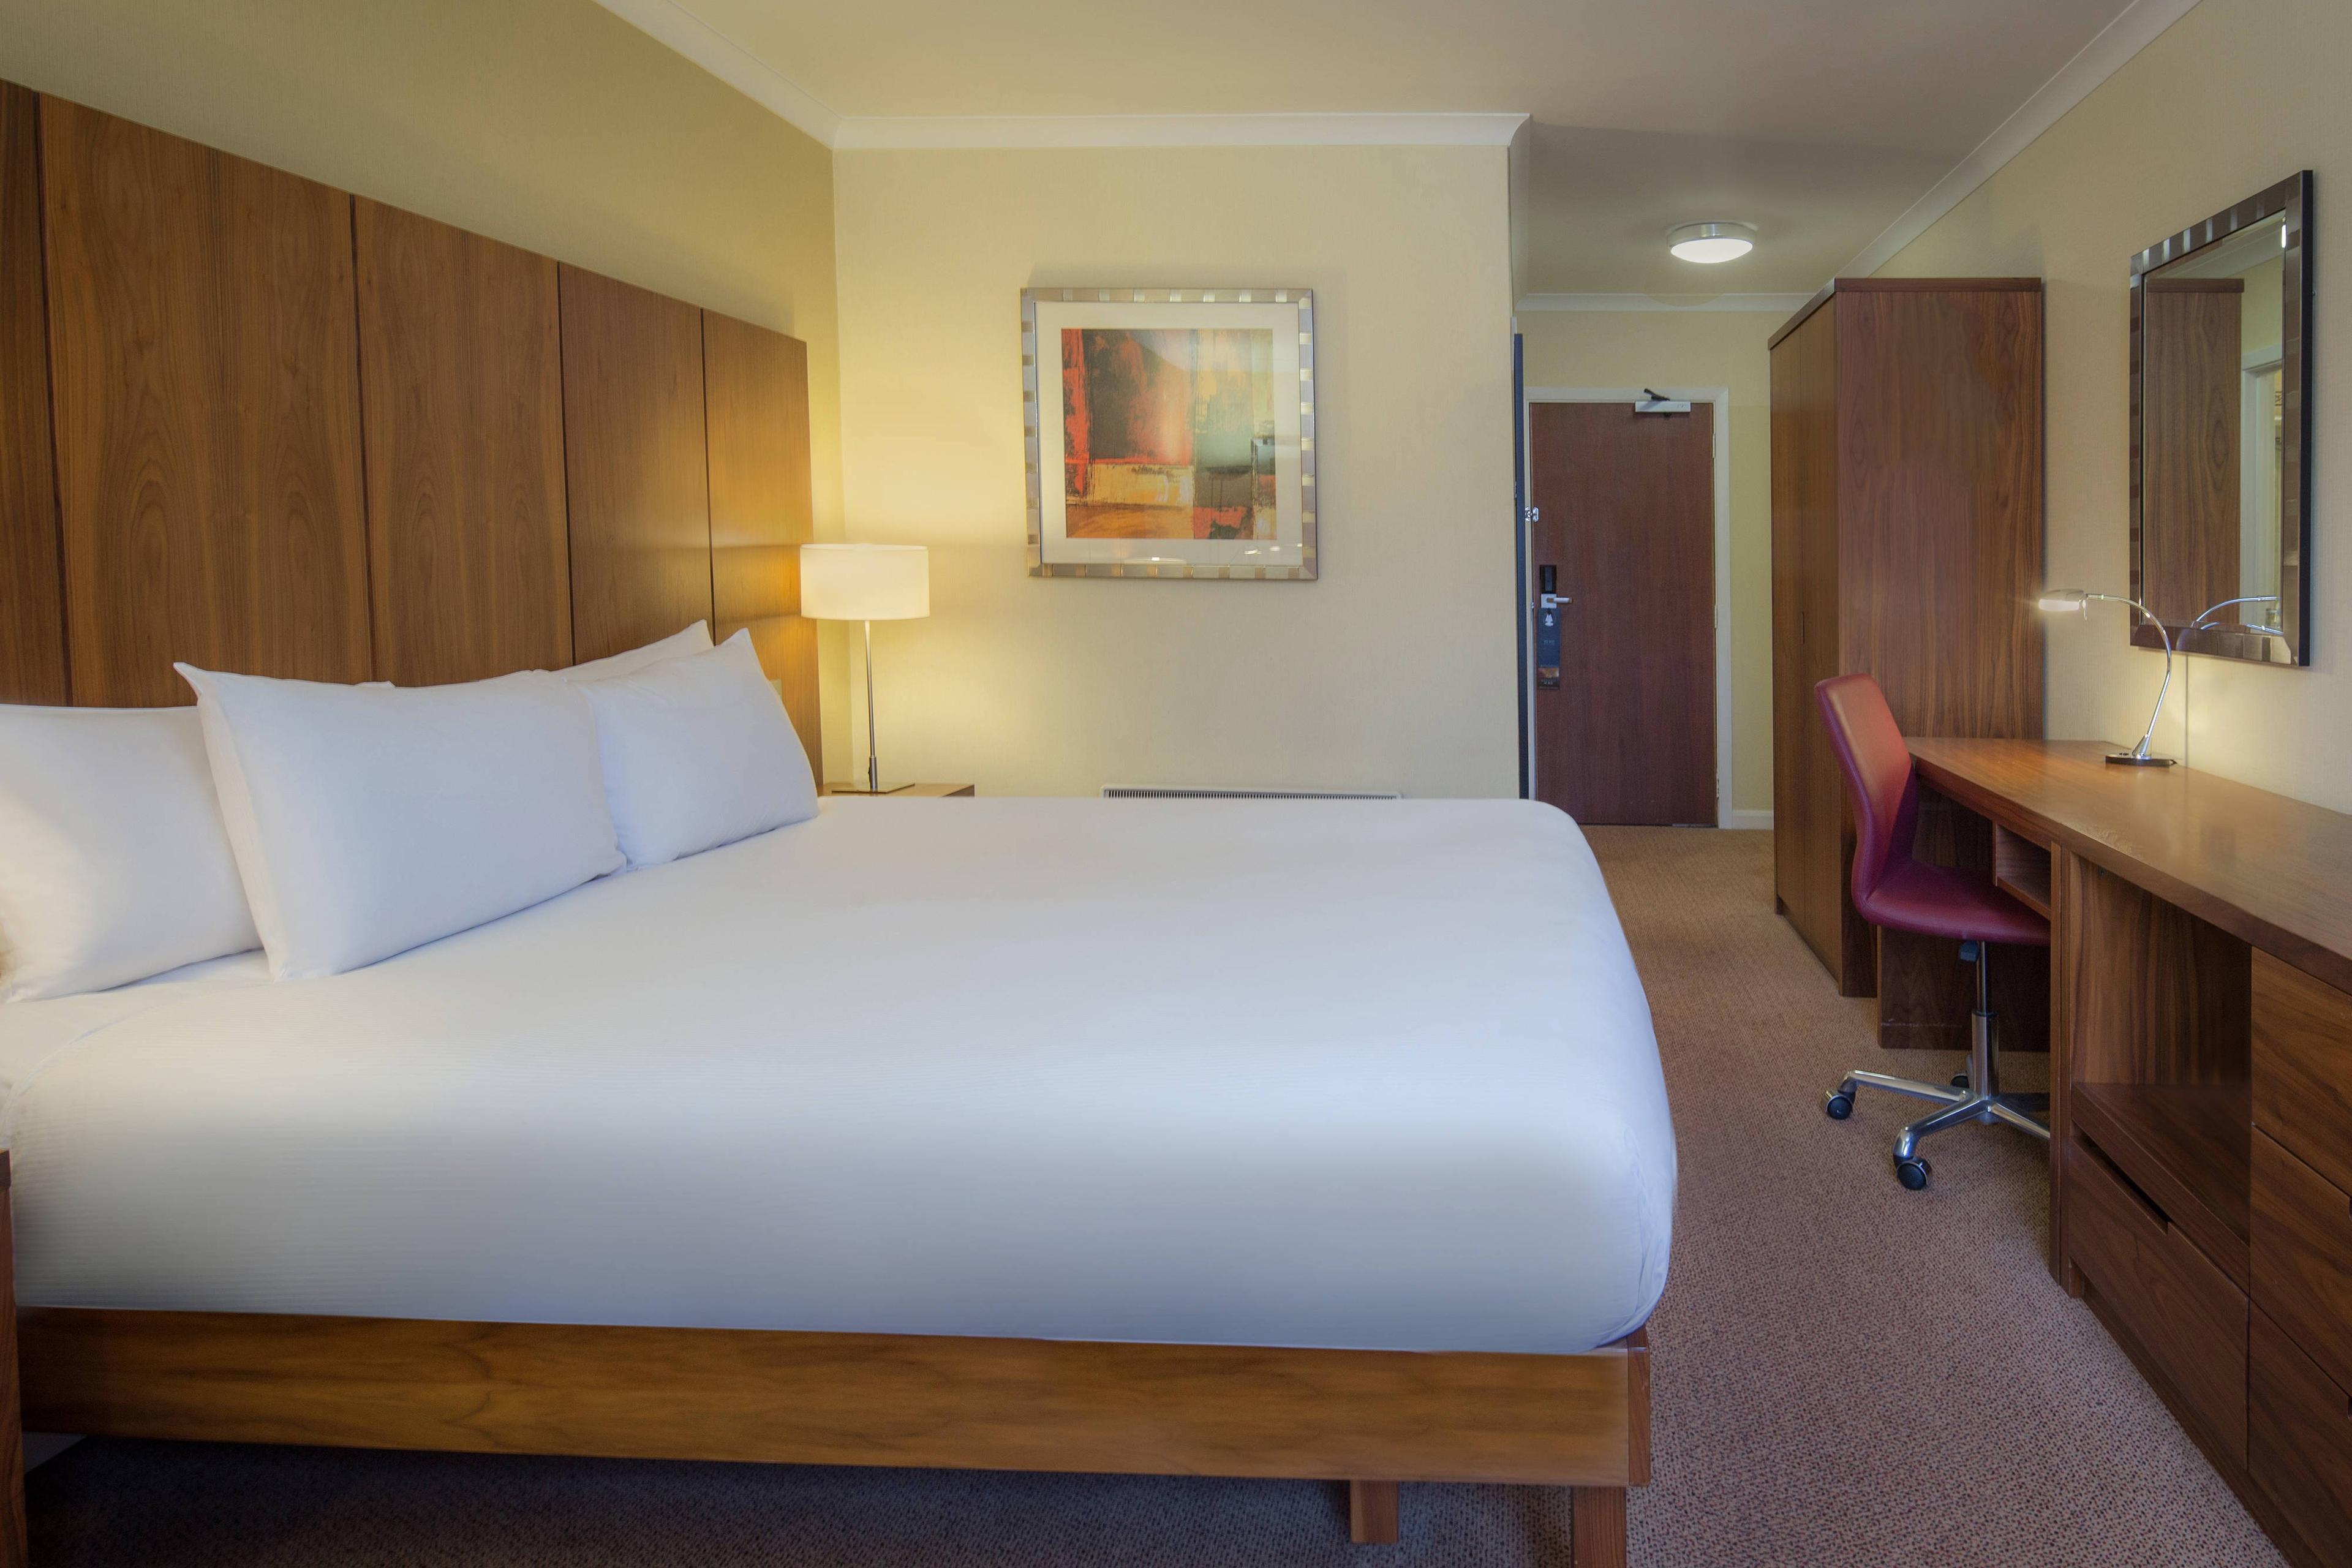 Relax in our upgraded bedrooms, with 19-square meters of floor space and a king bed as standard.